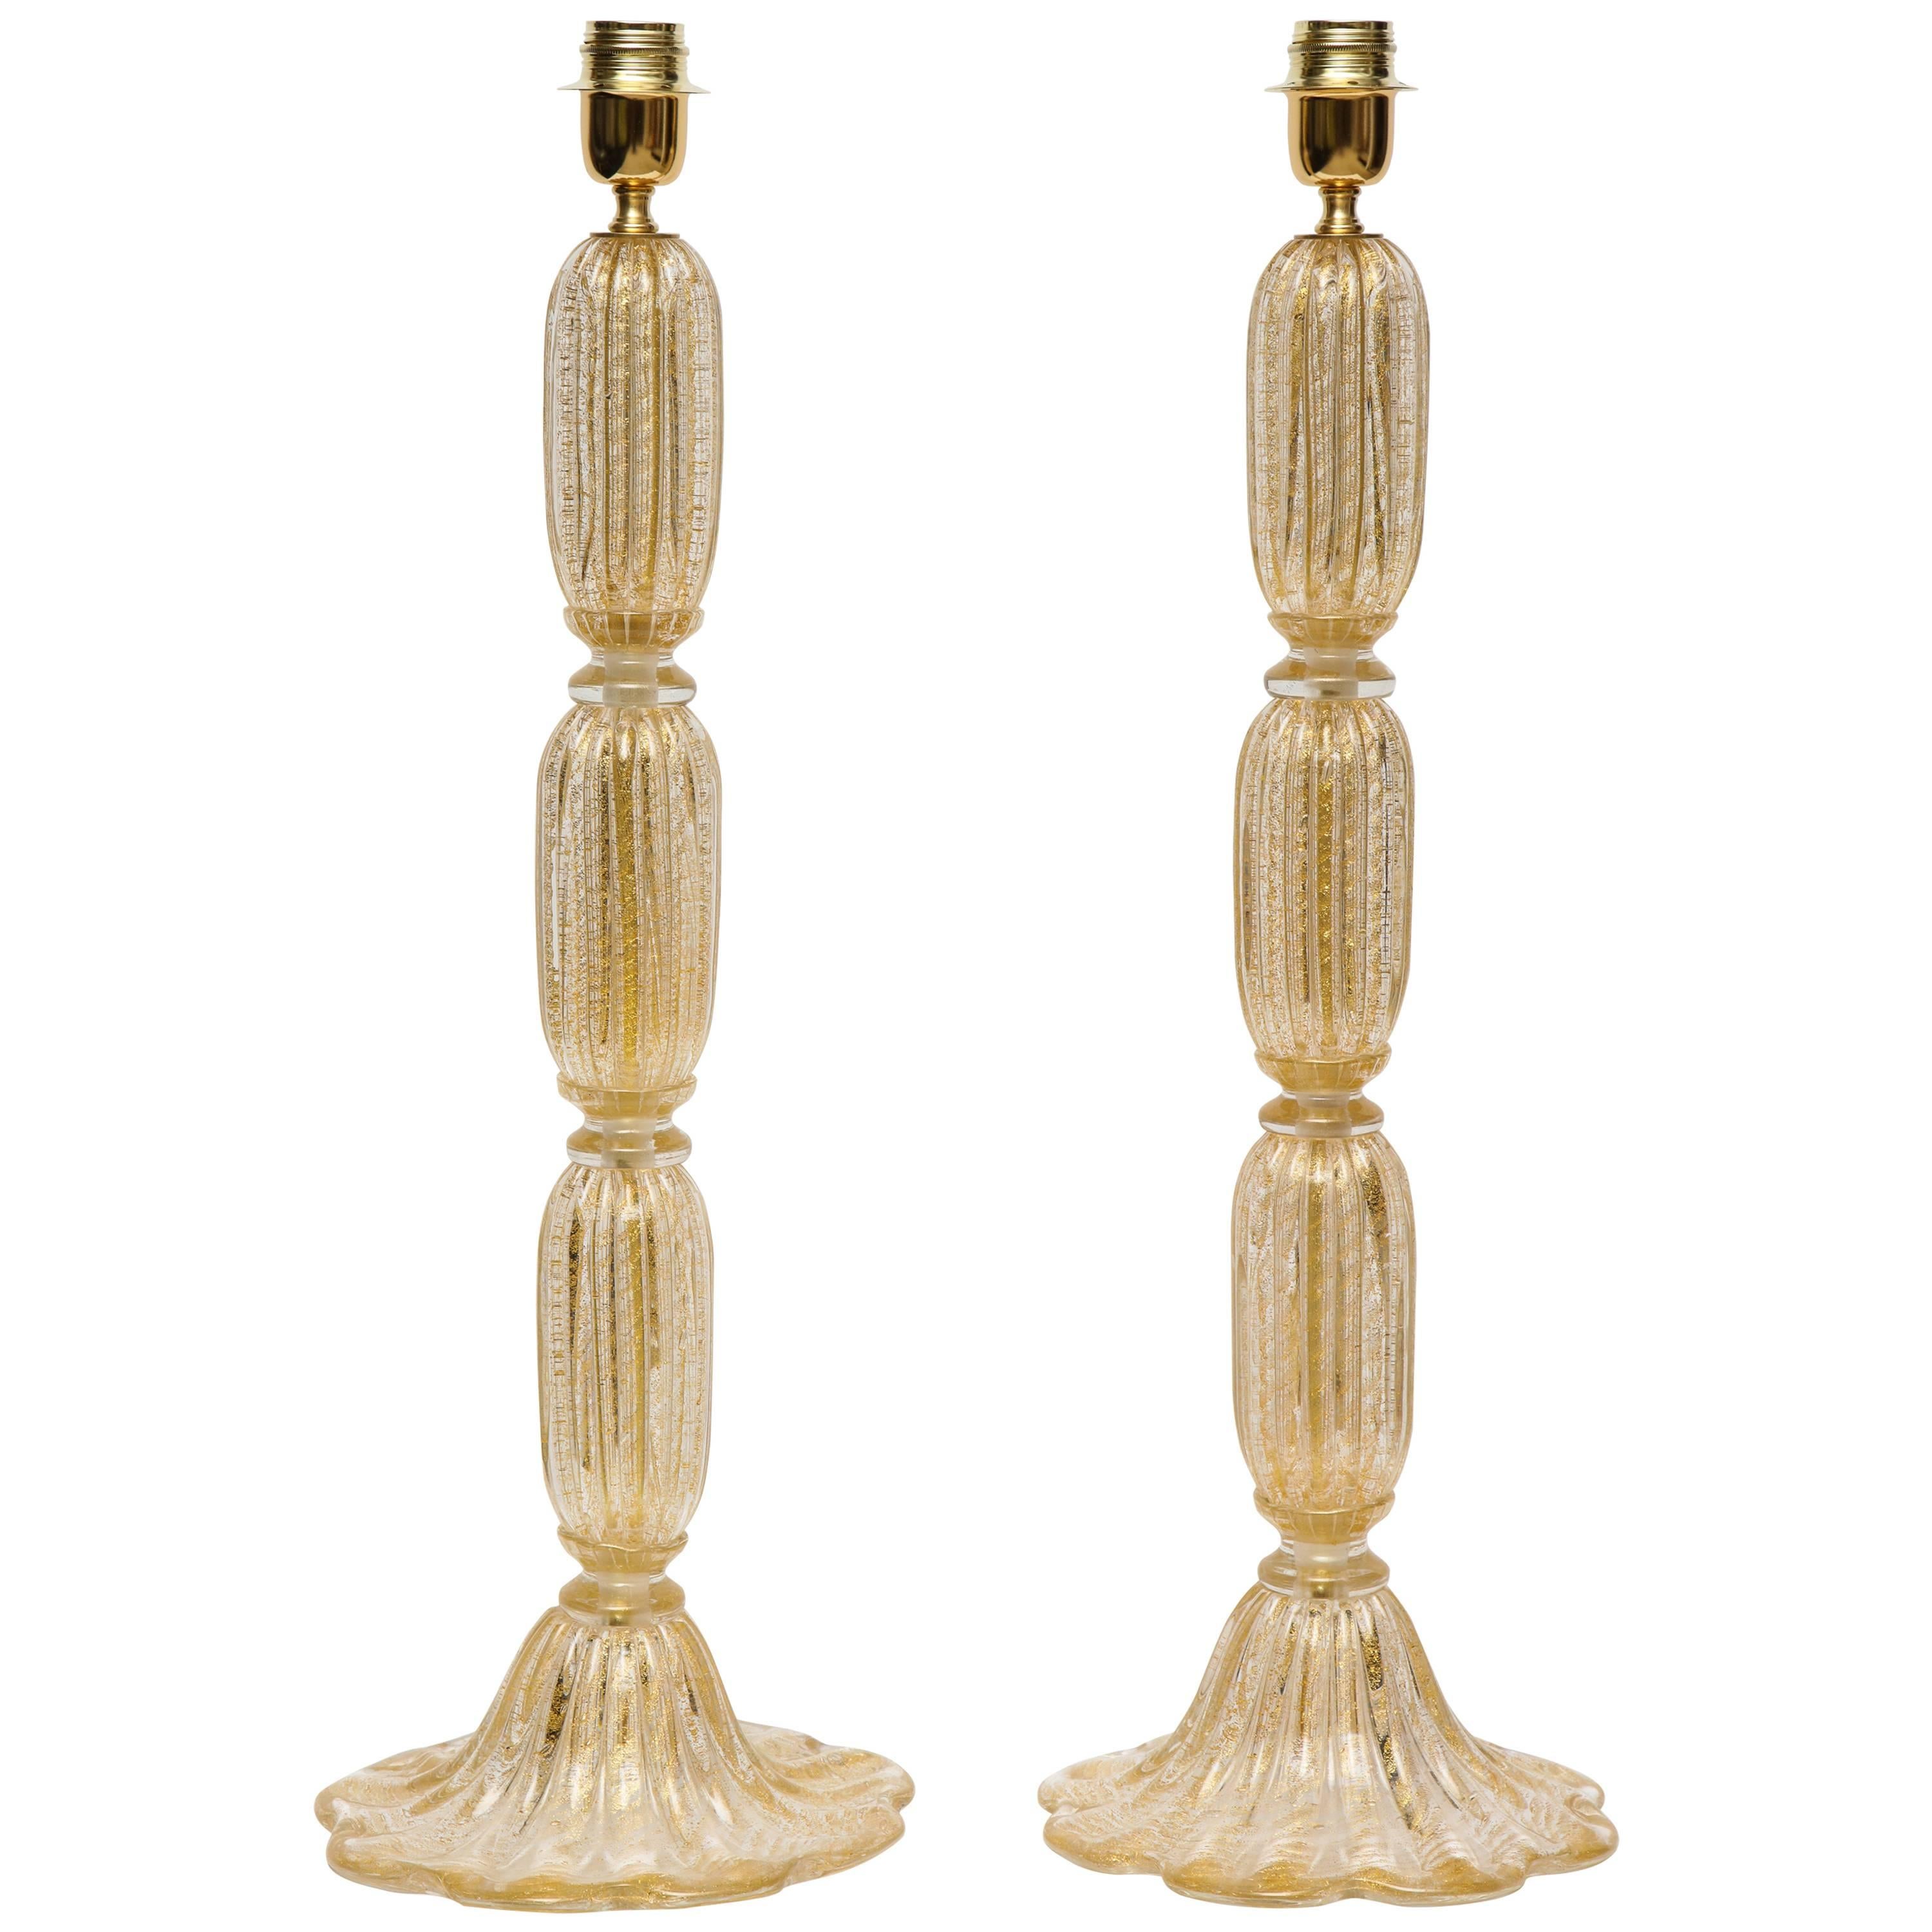 Tall Pair of Seguso Style 23-Karat Speckled Gold Murano Glass Lamps, Italy